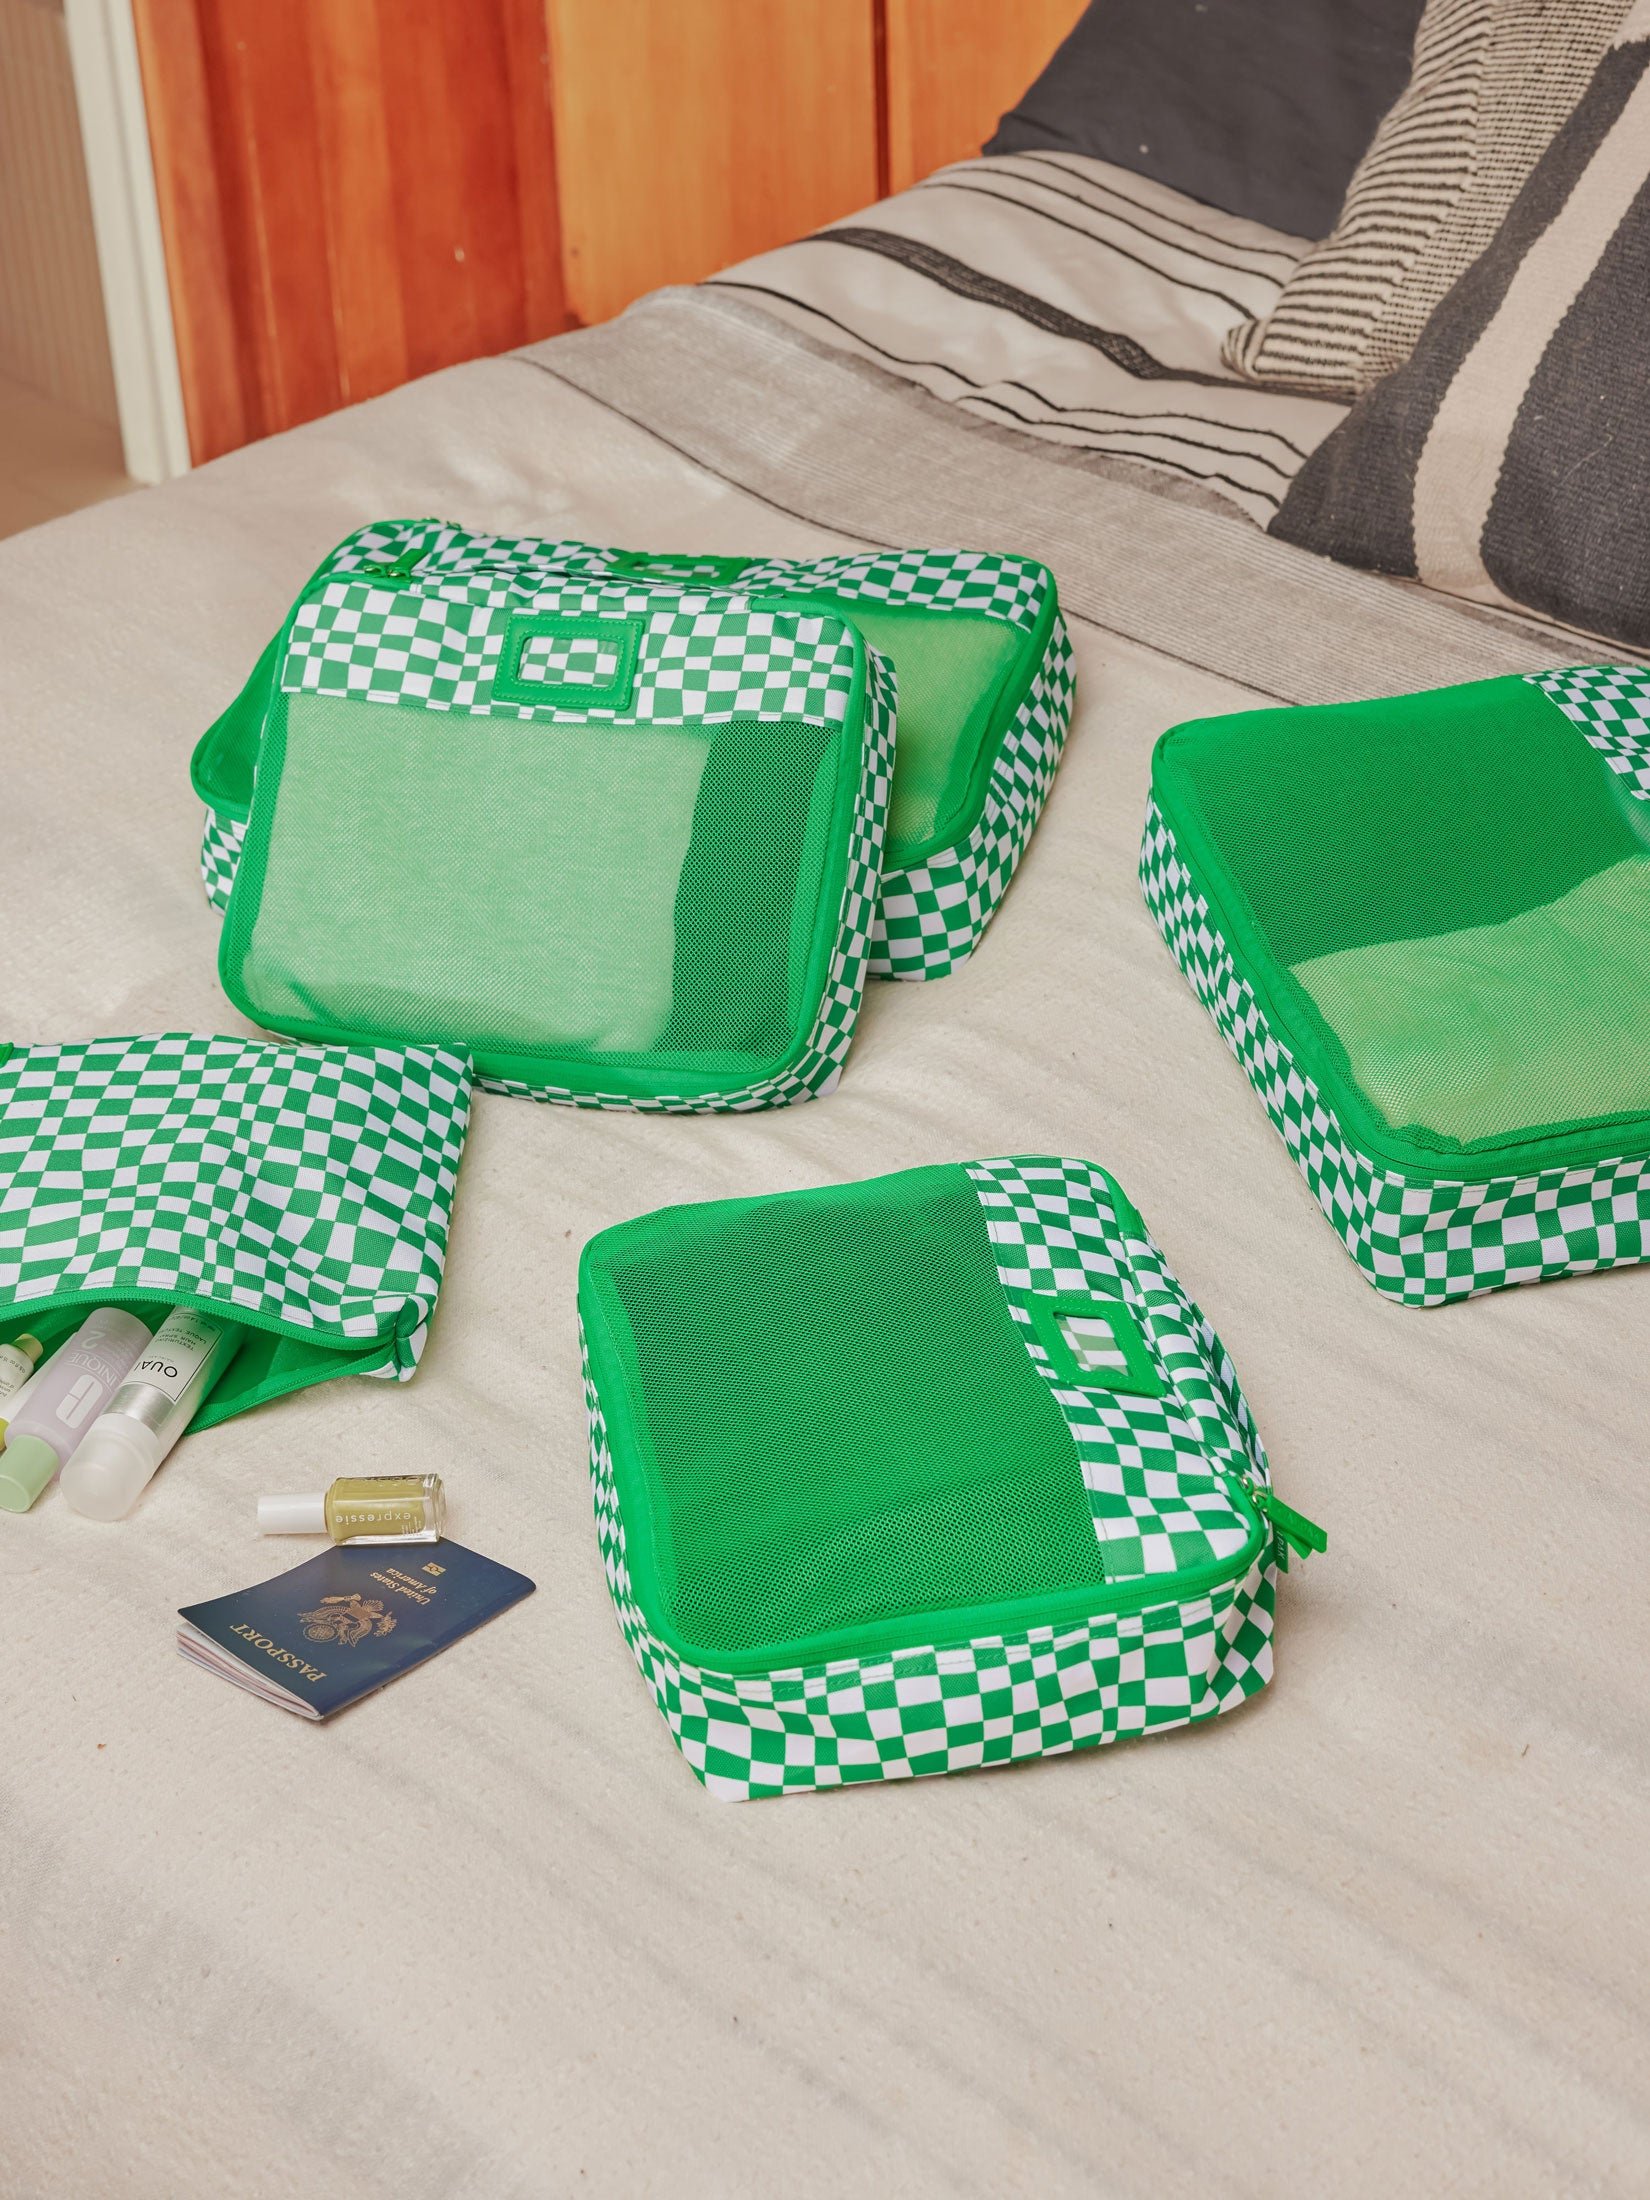 CALPAK 5 piece set packing cubes for travel with labels and top handles mesh front in green checkerboard pattern